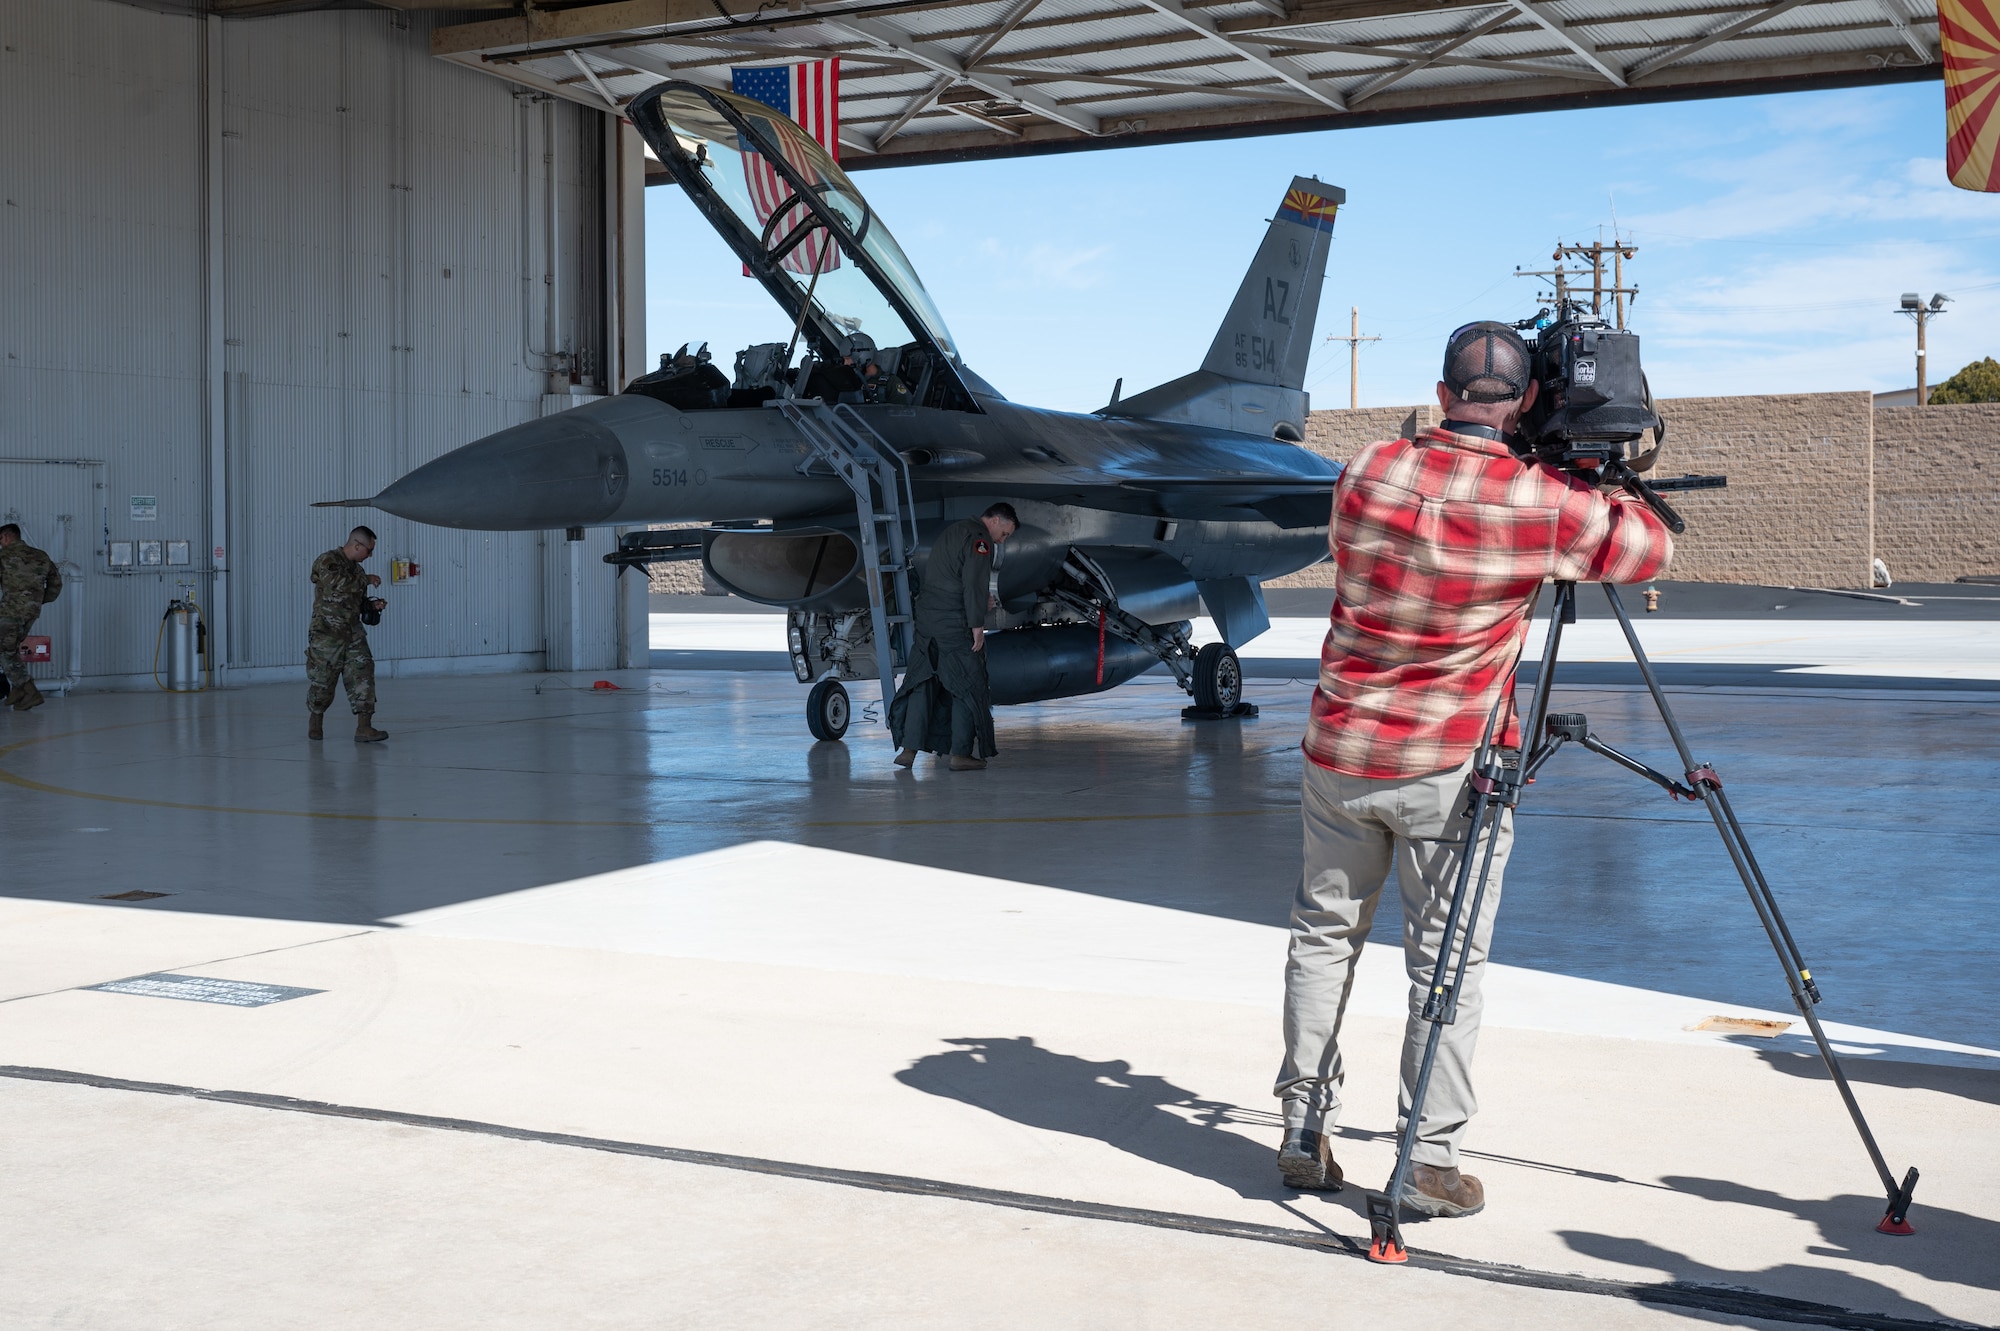 Fox News videographer, Bryan Allman, films correspondent, Matt Finn, as he prepares for flight in an F-16 to highlight air defense security efforts that will be in place over State Farm Stadium in Glendale, Arizona, during Super Bowl LVII on Feb. 12. (U.S. Air Force photo by Maj. Angela Walz)